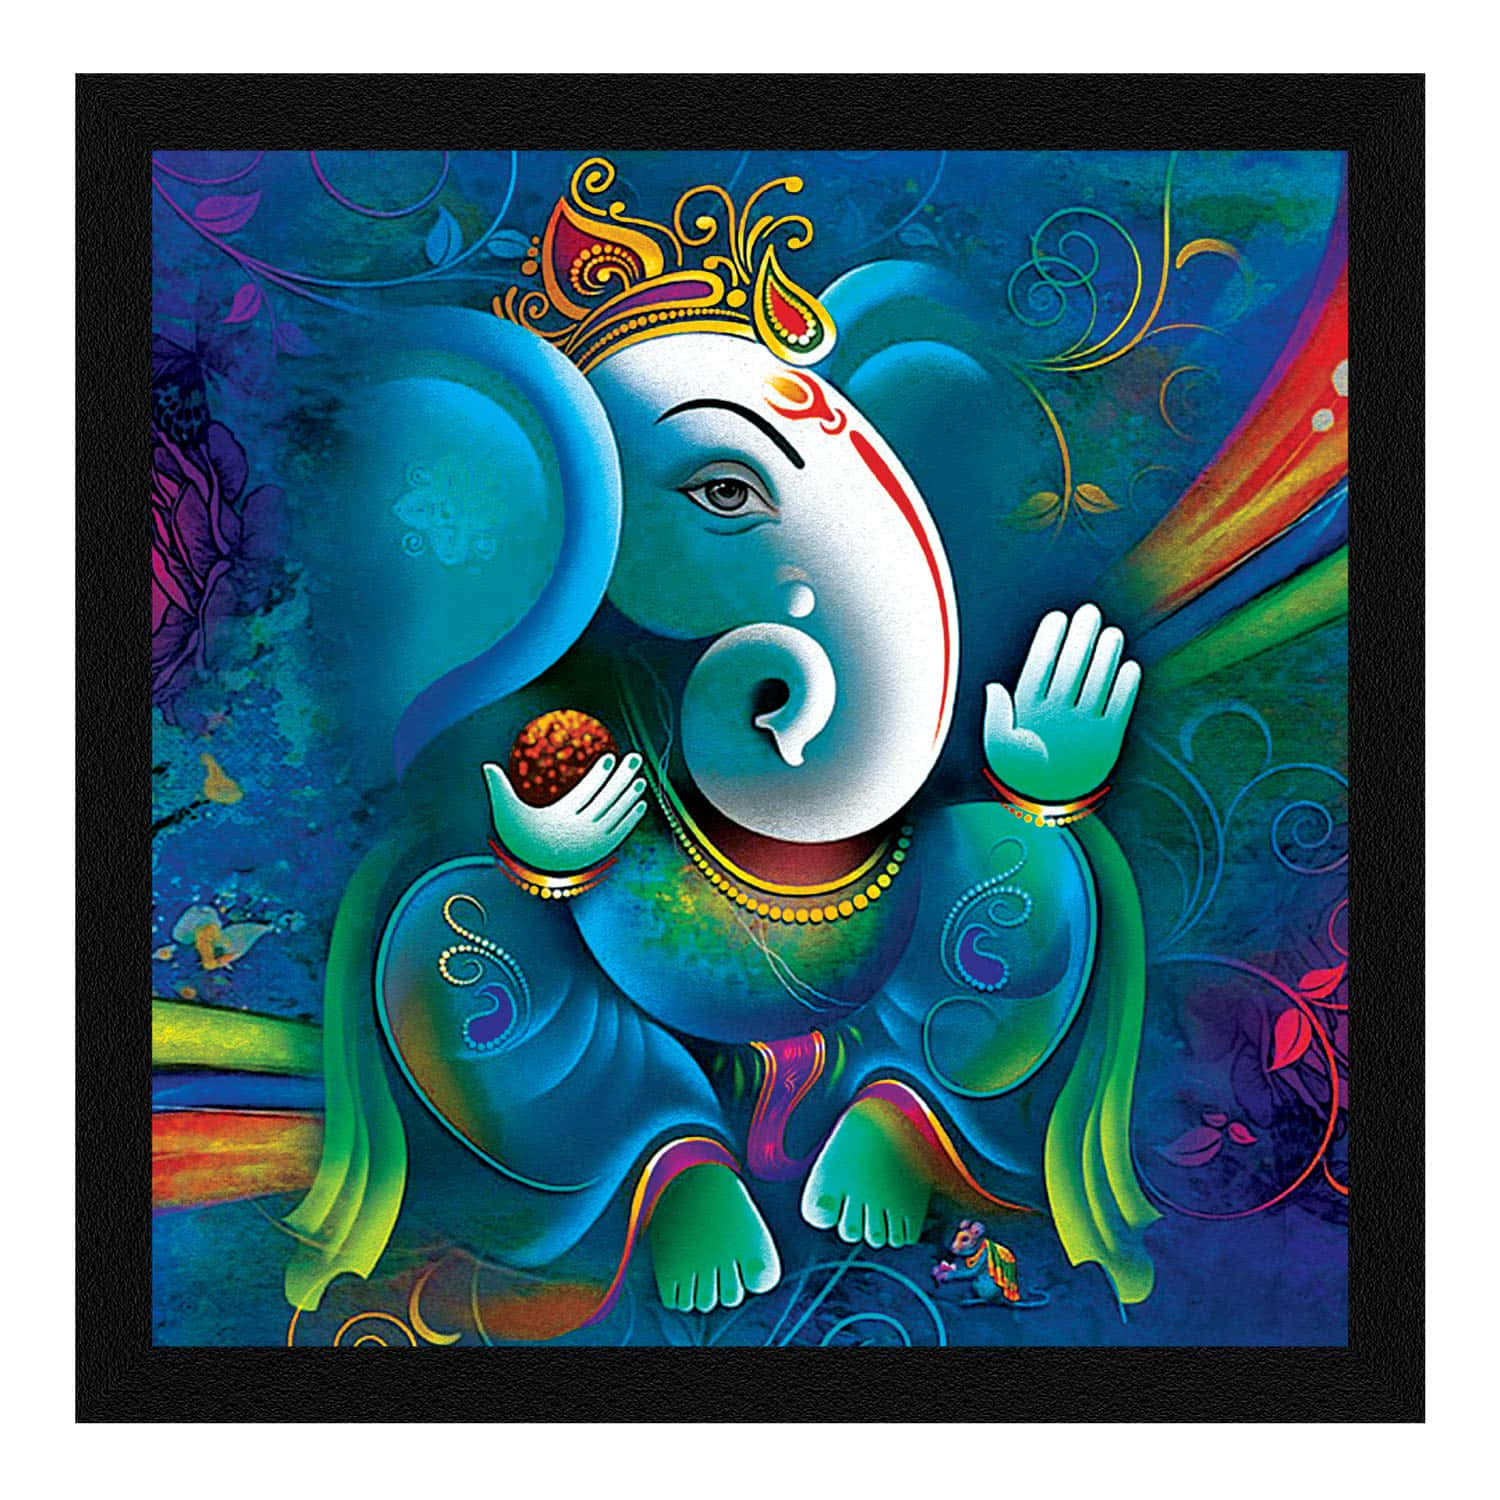 A Painting Of A Colorful Ganesha